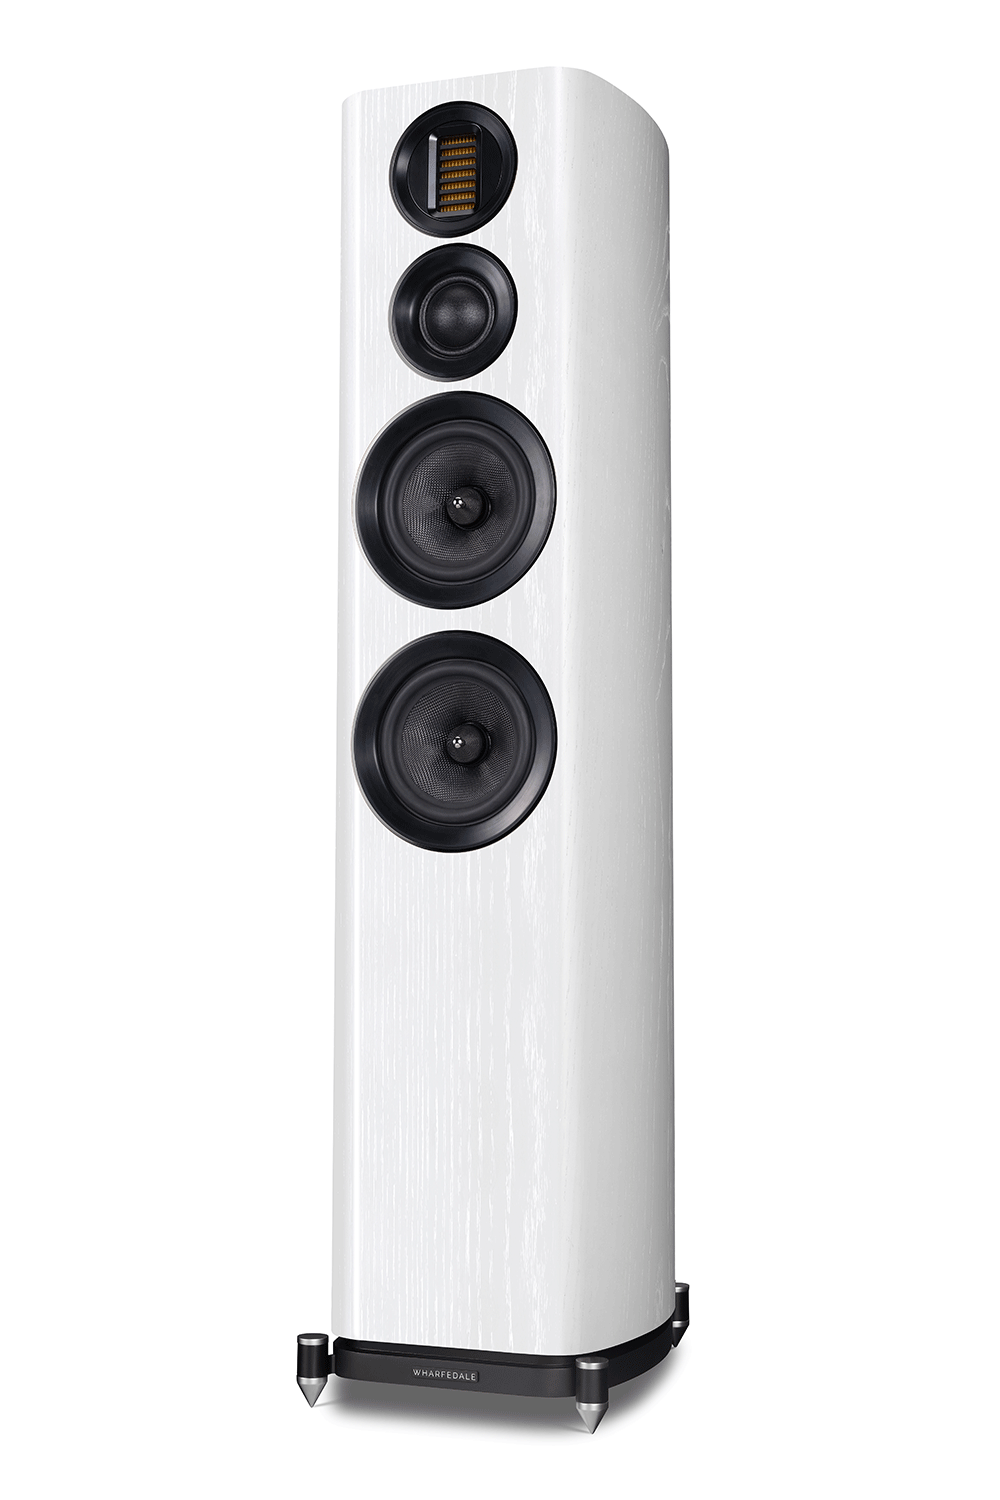 Wharfedale’s new EVO 4 has grown out of the extensive research and development that produced the ELYSIAN flagship loudspeakers and borrows much of the technology involved in ELYSIAN. 